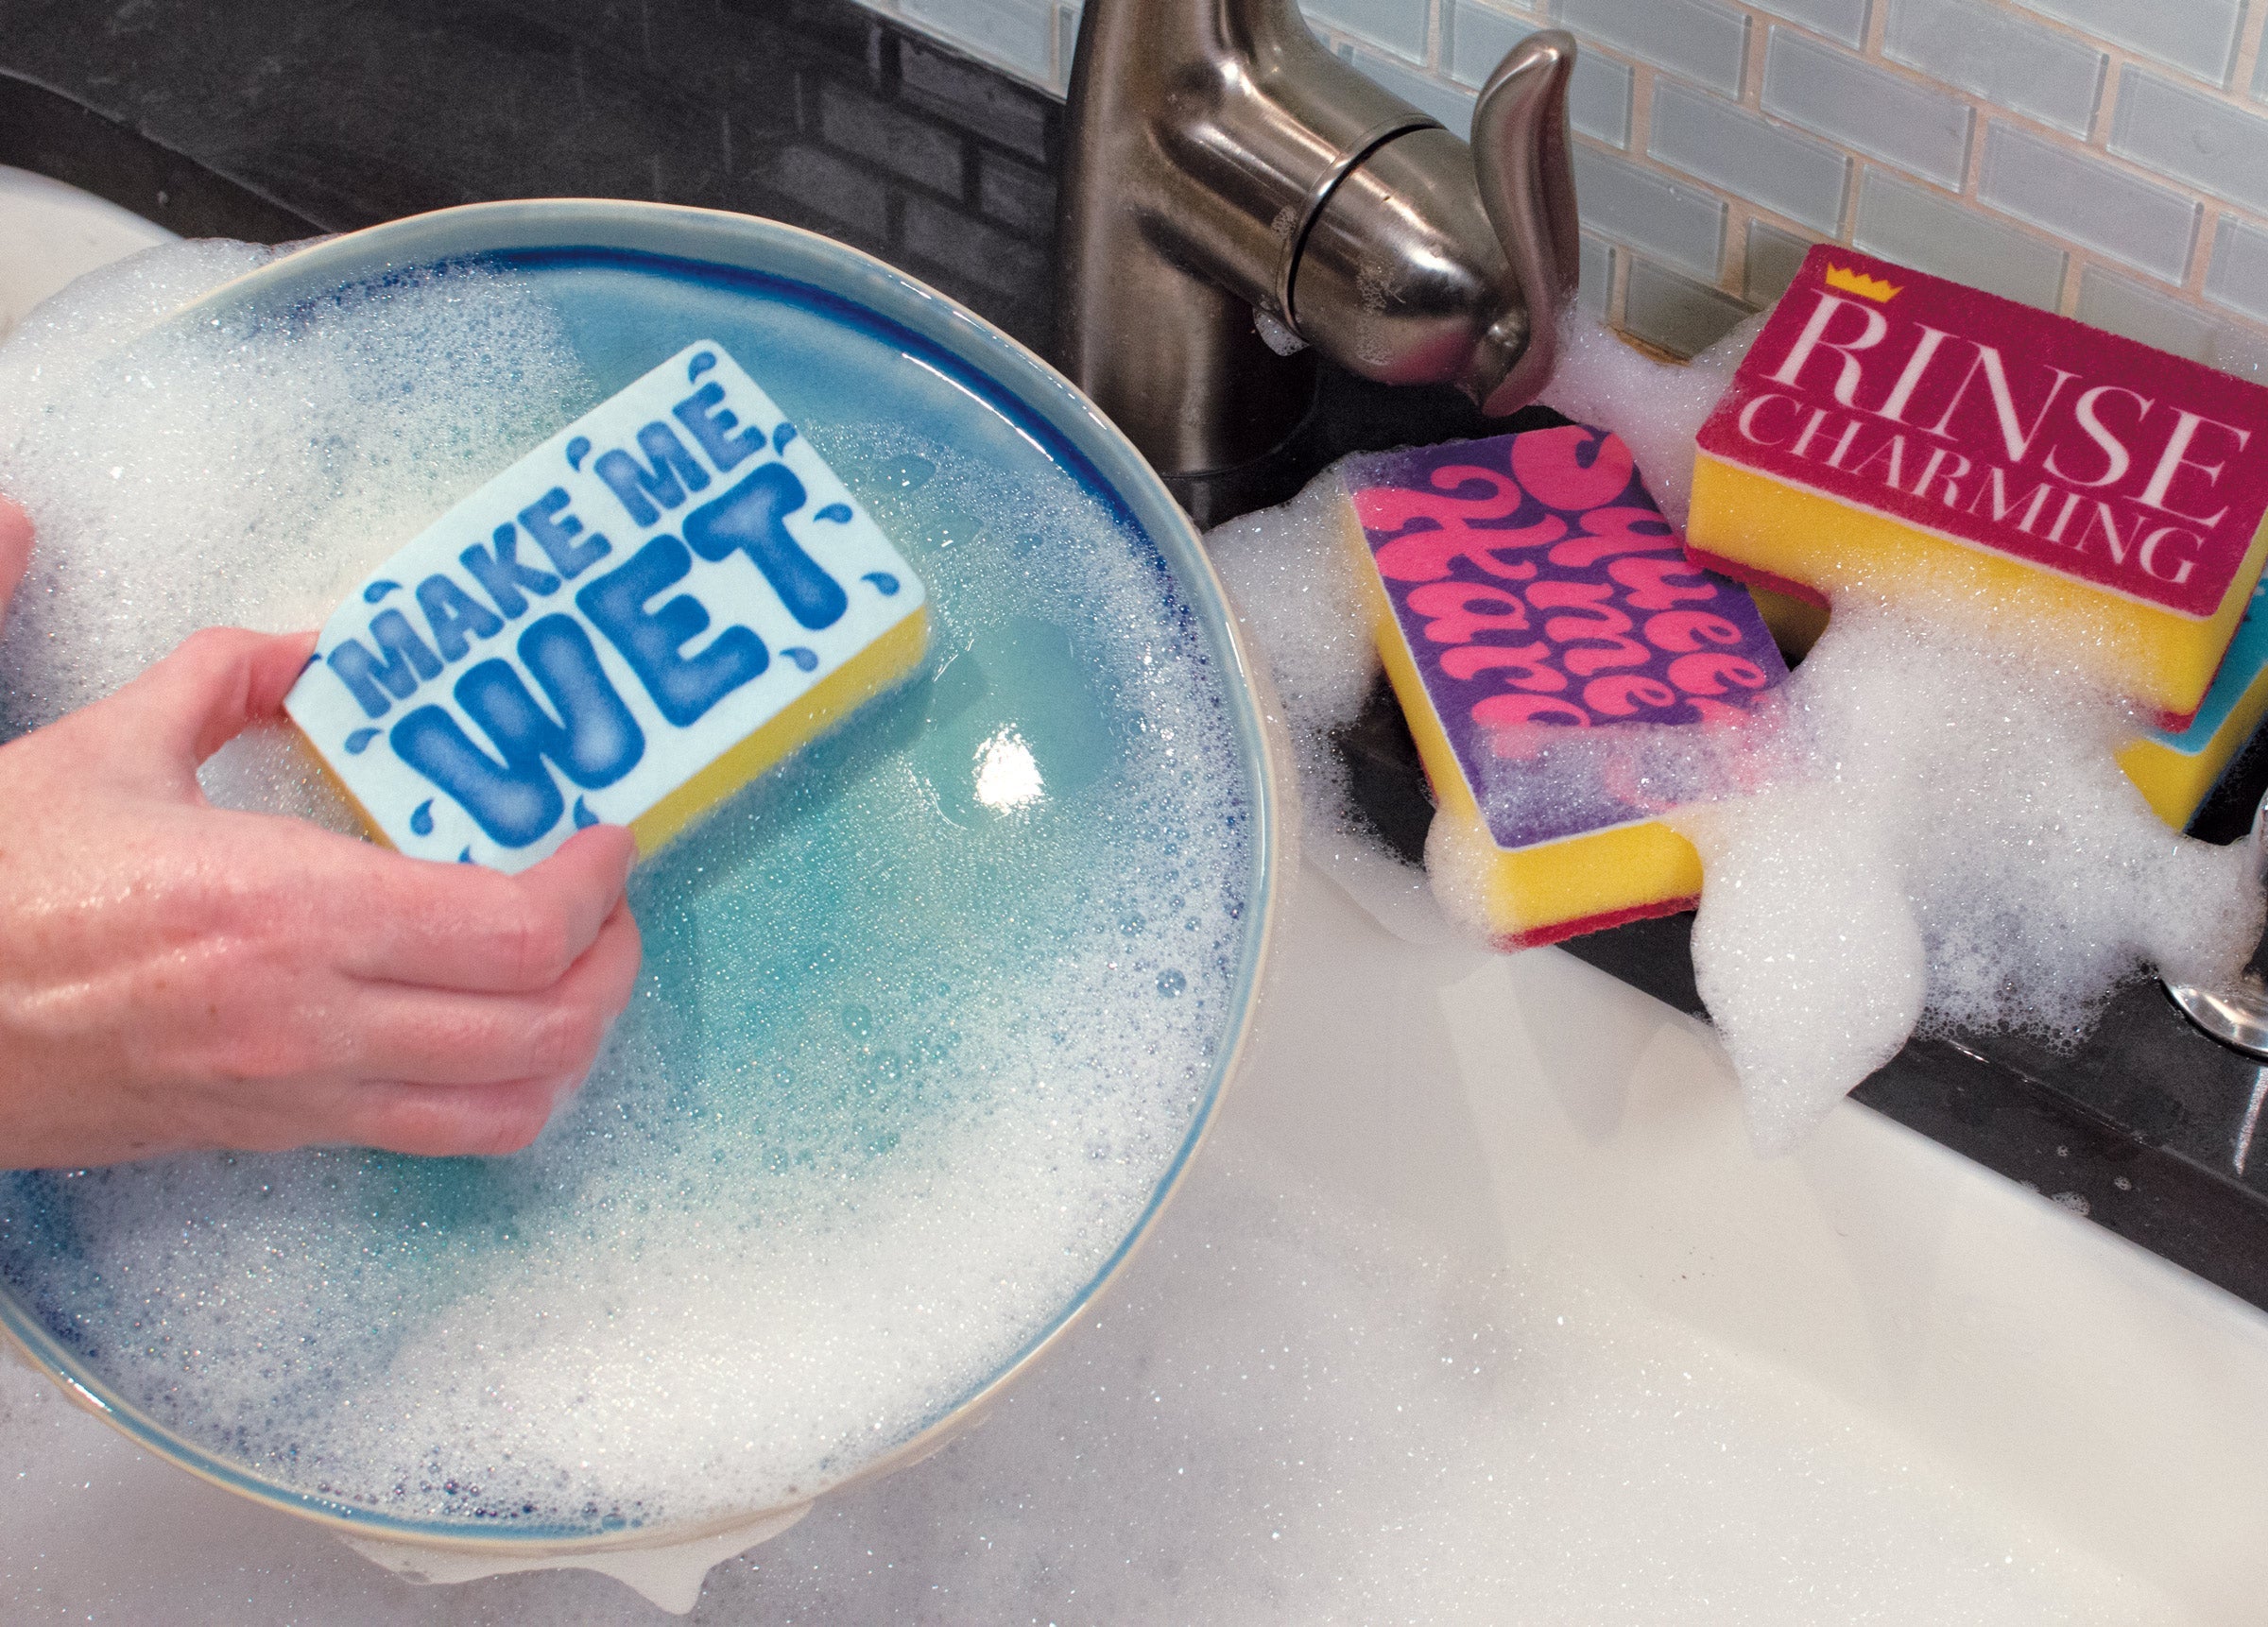 Product photo of Rinse Charming Sponge Set, a novelty gift manufactured by The Unemployed Philosophers Guild.